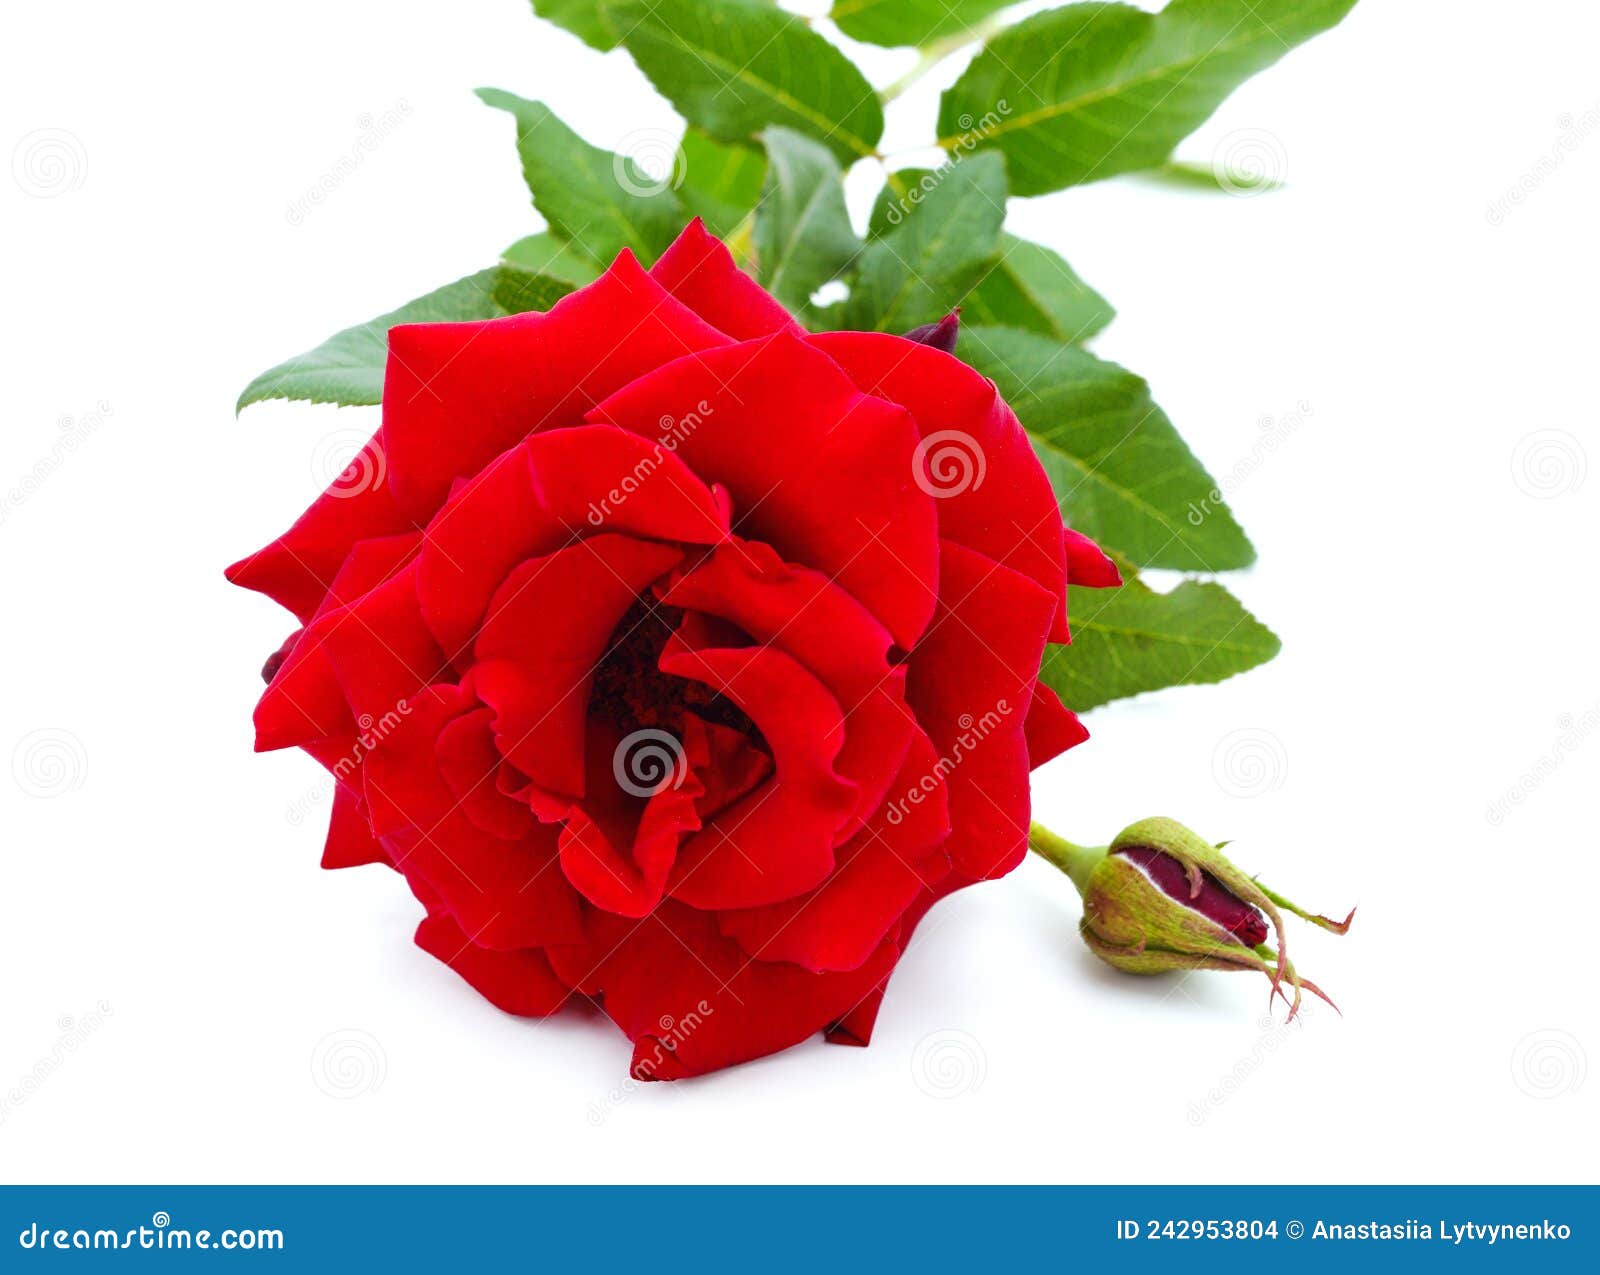 Beautiful red rose stock photo. Image of friendship - 242953804